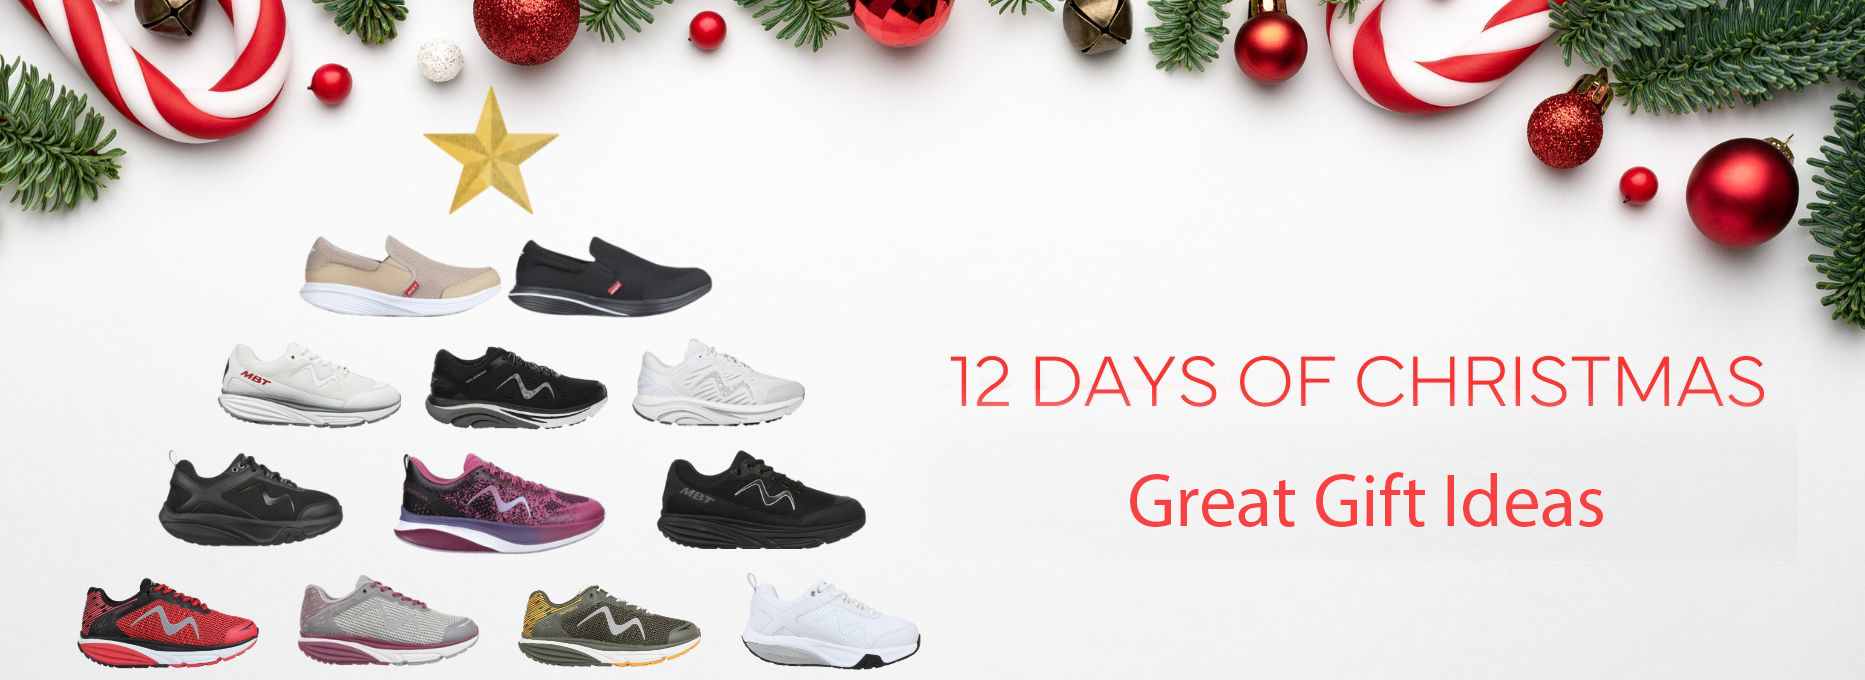 12 Days of Christmas - Great Gift Ideas